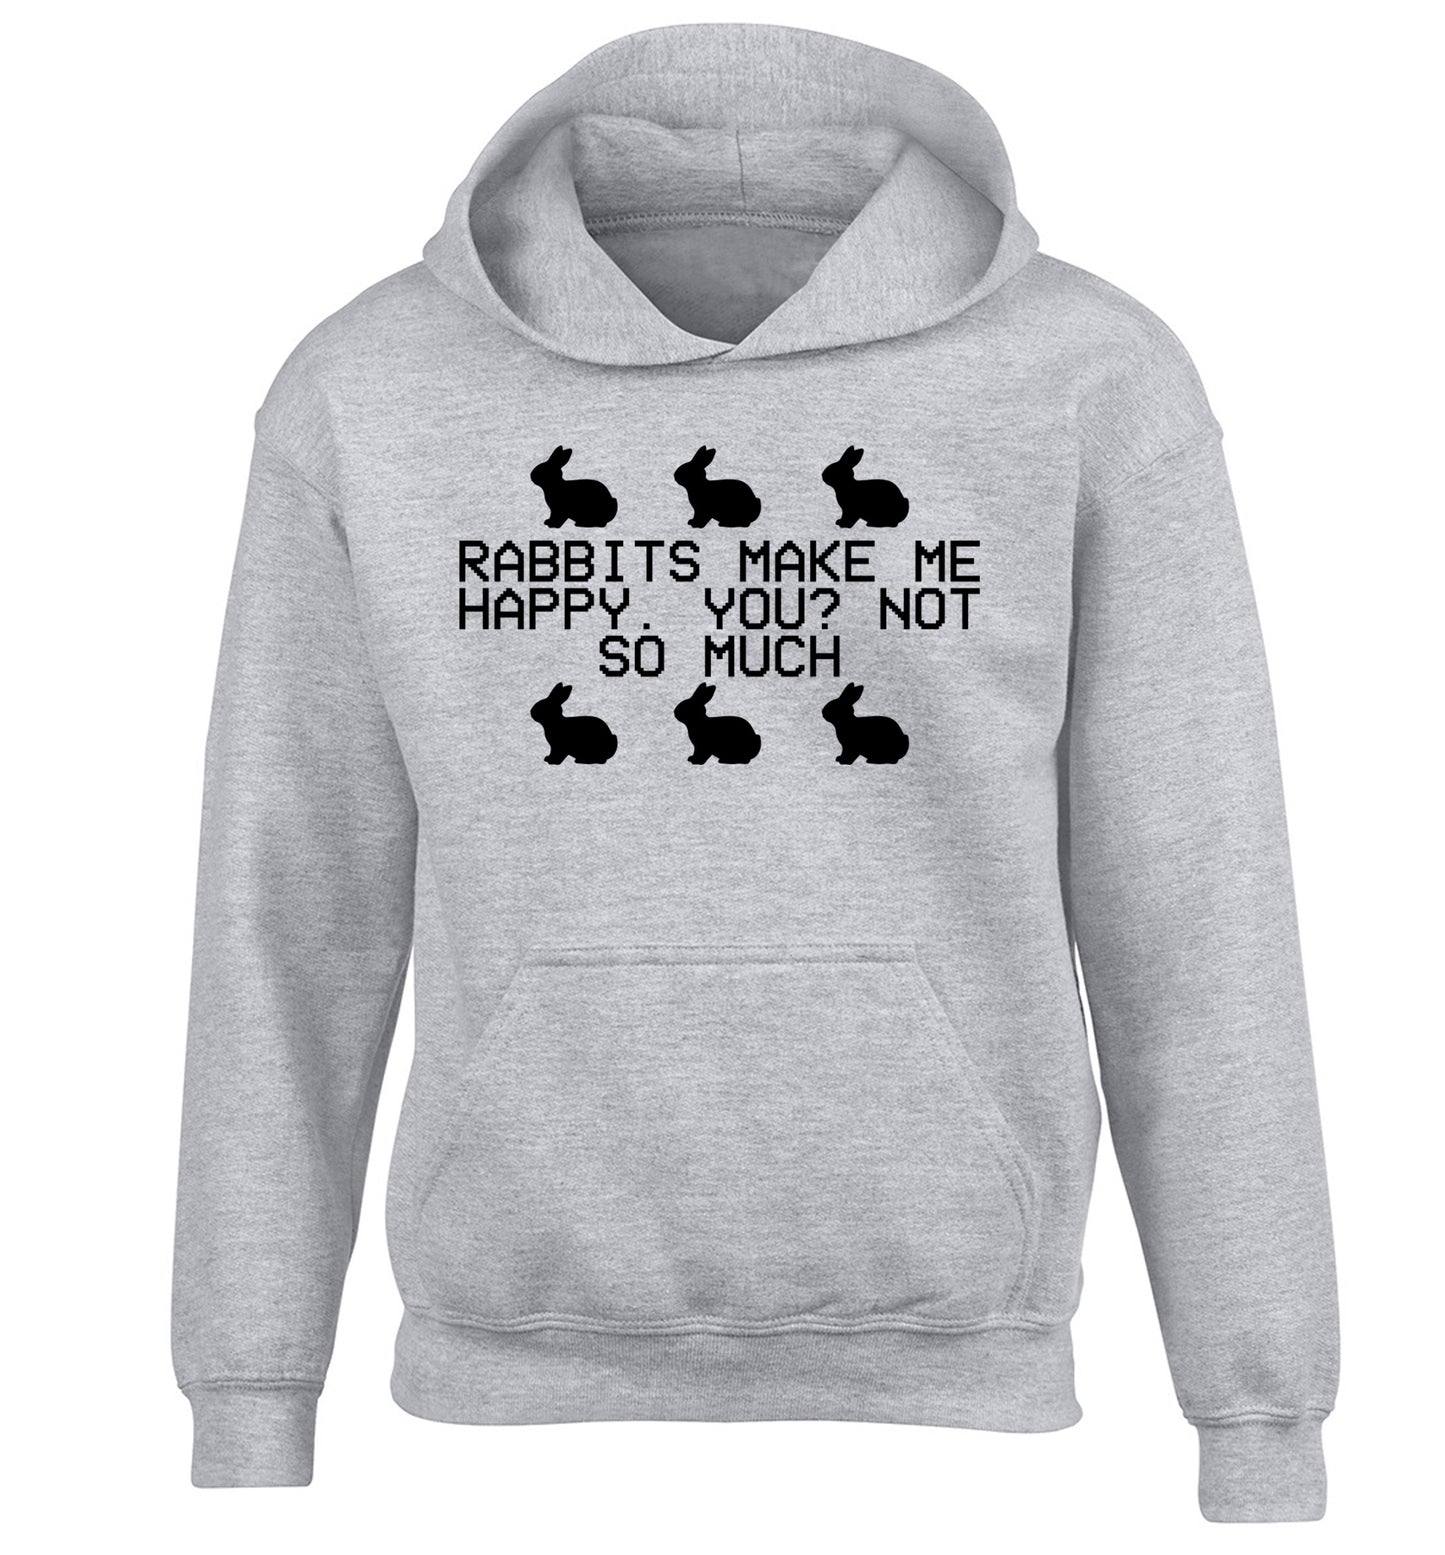 Rabbits make me happy, you not so much children's grey hoodie 12-14 Years